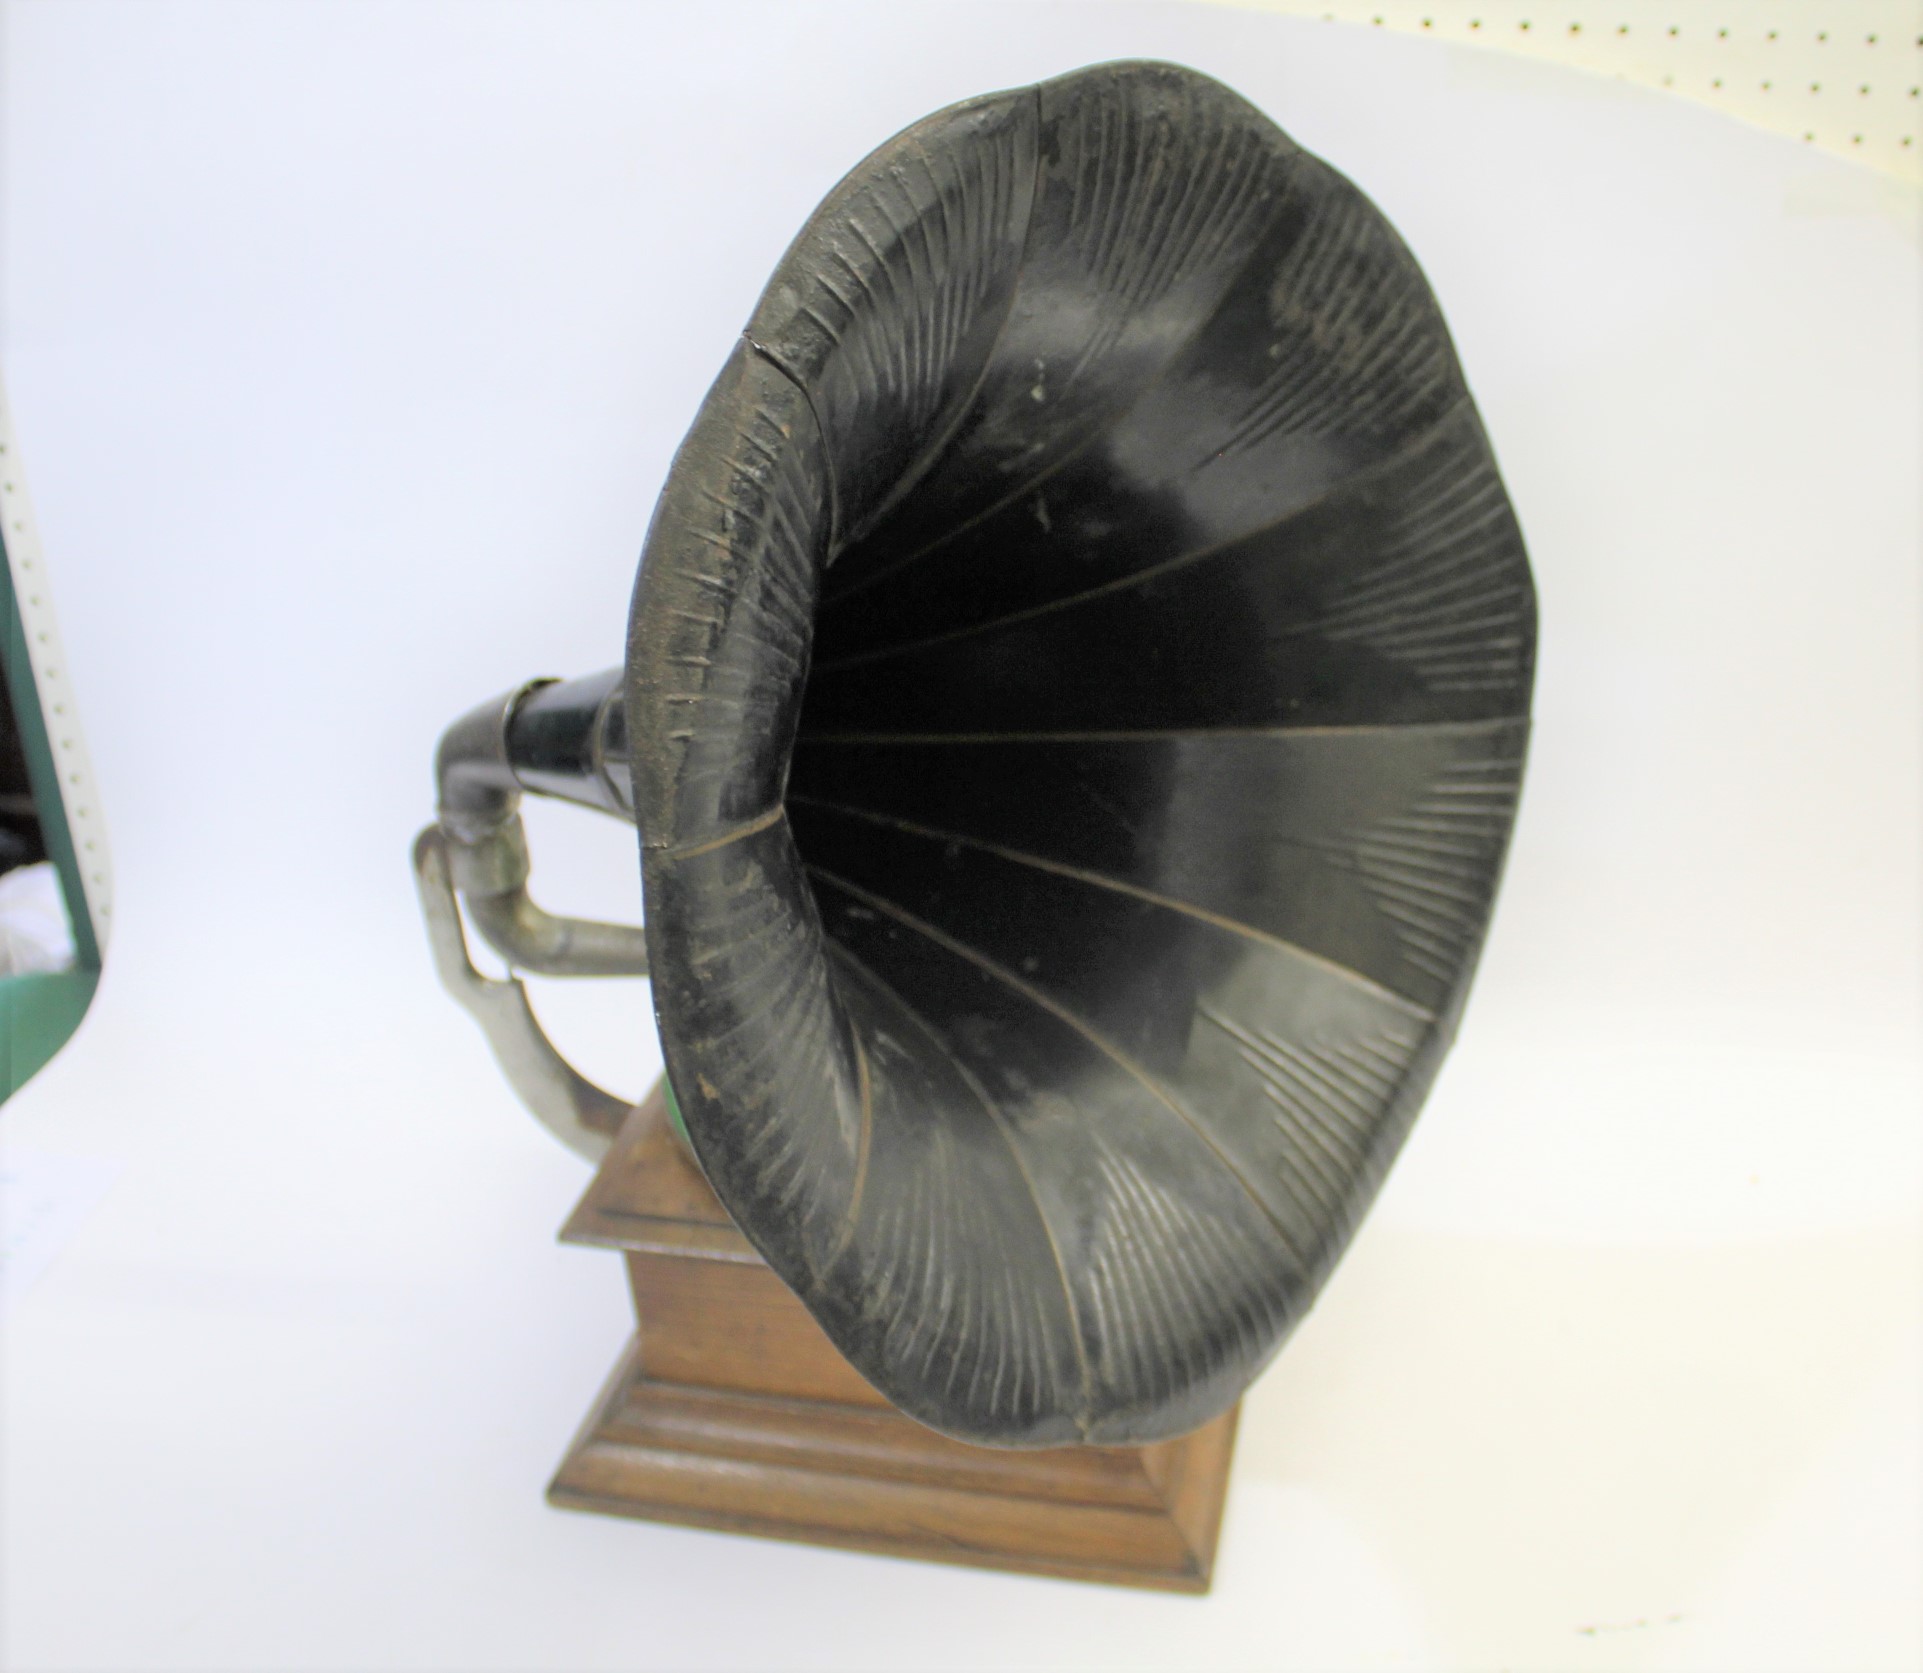 HMV HORN GRAMOPHONE & HORN the gramophone with an oak case and HMV Exhibition soundbox, with a label - Image 4 of 4